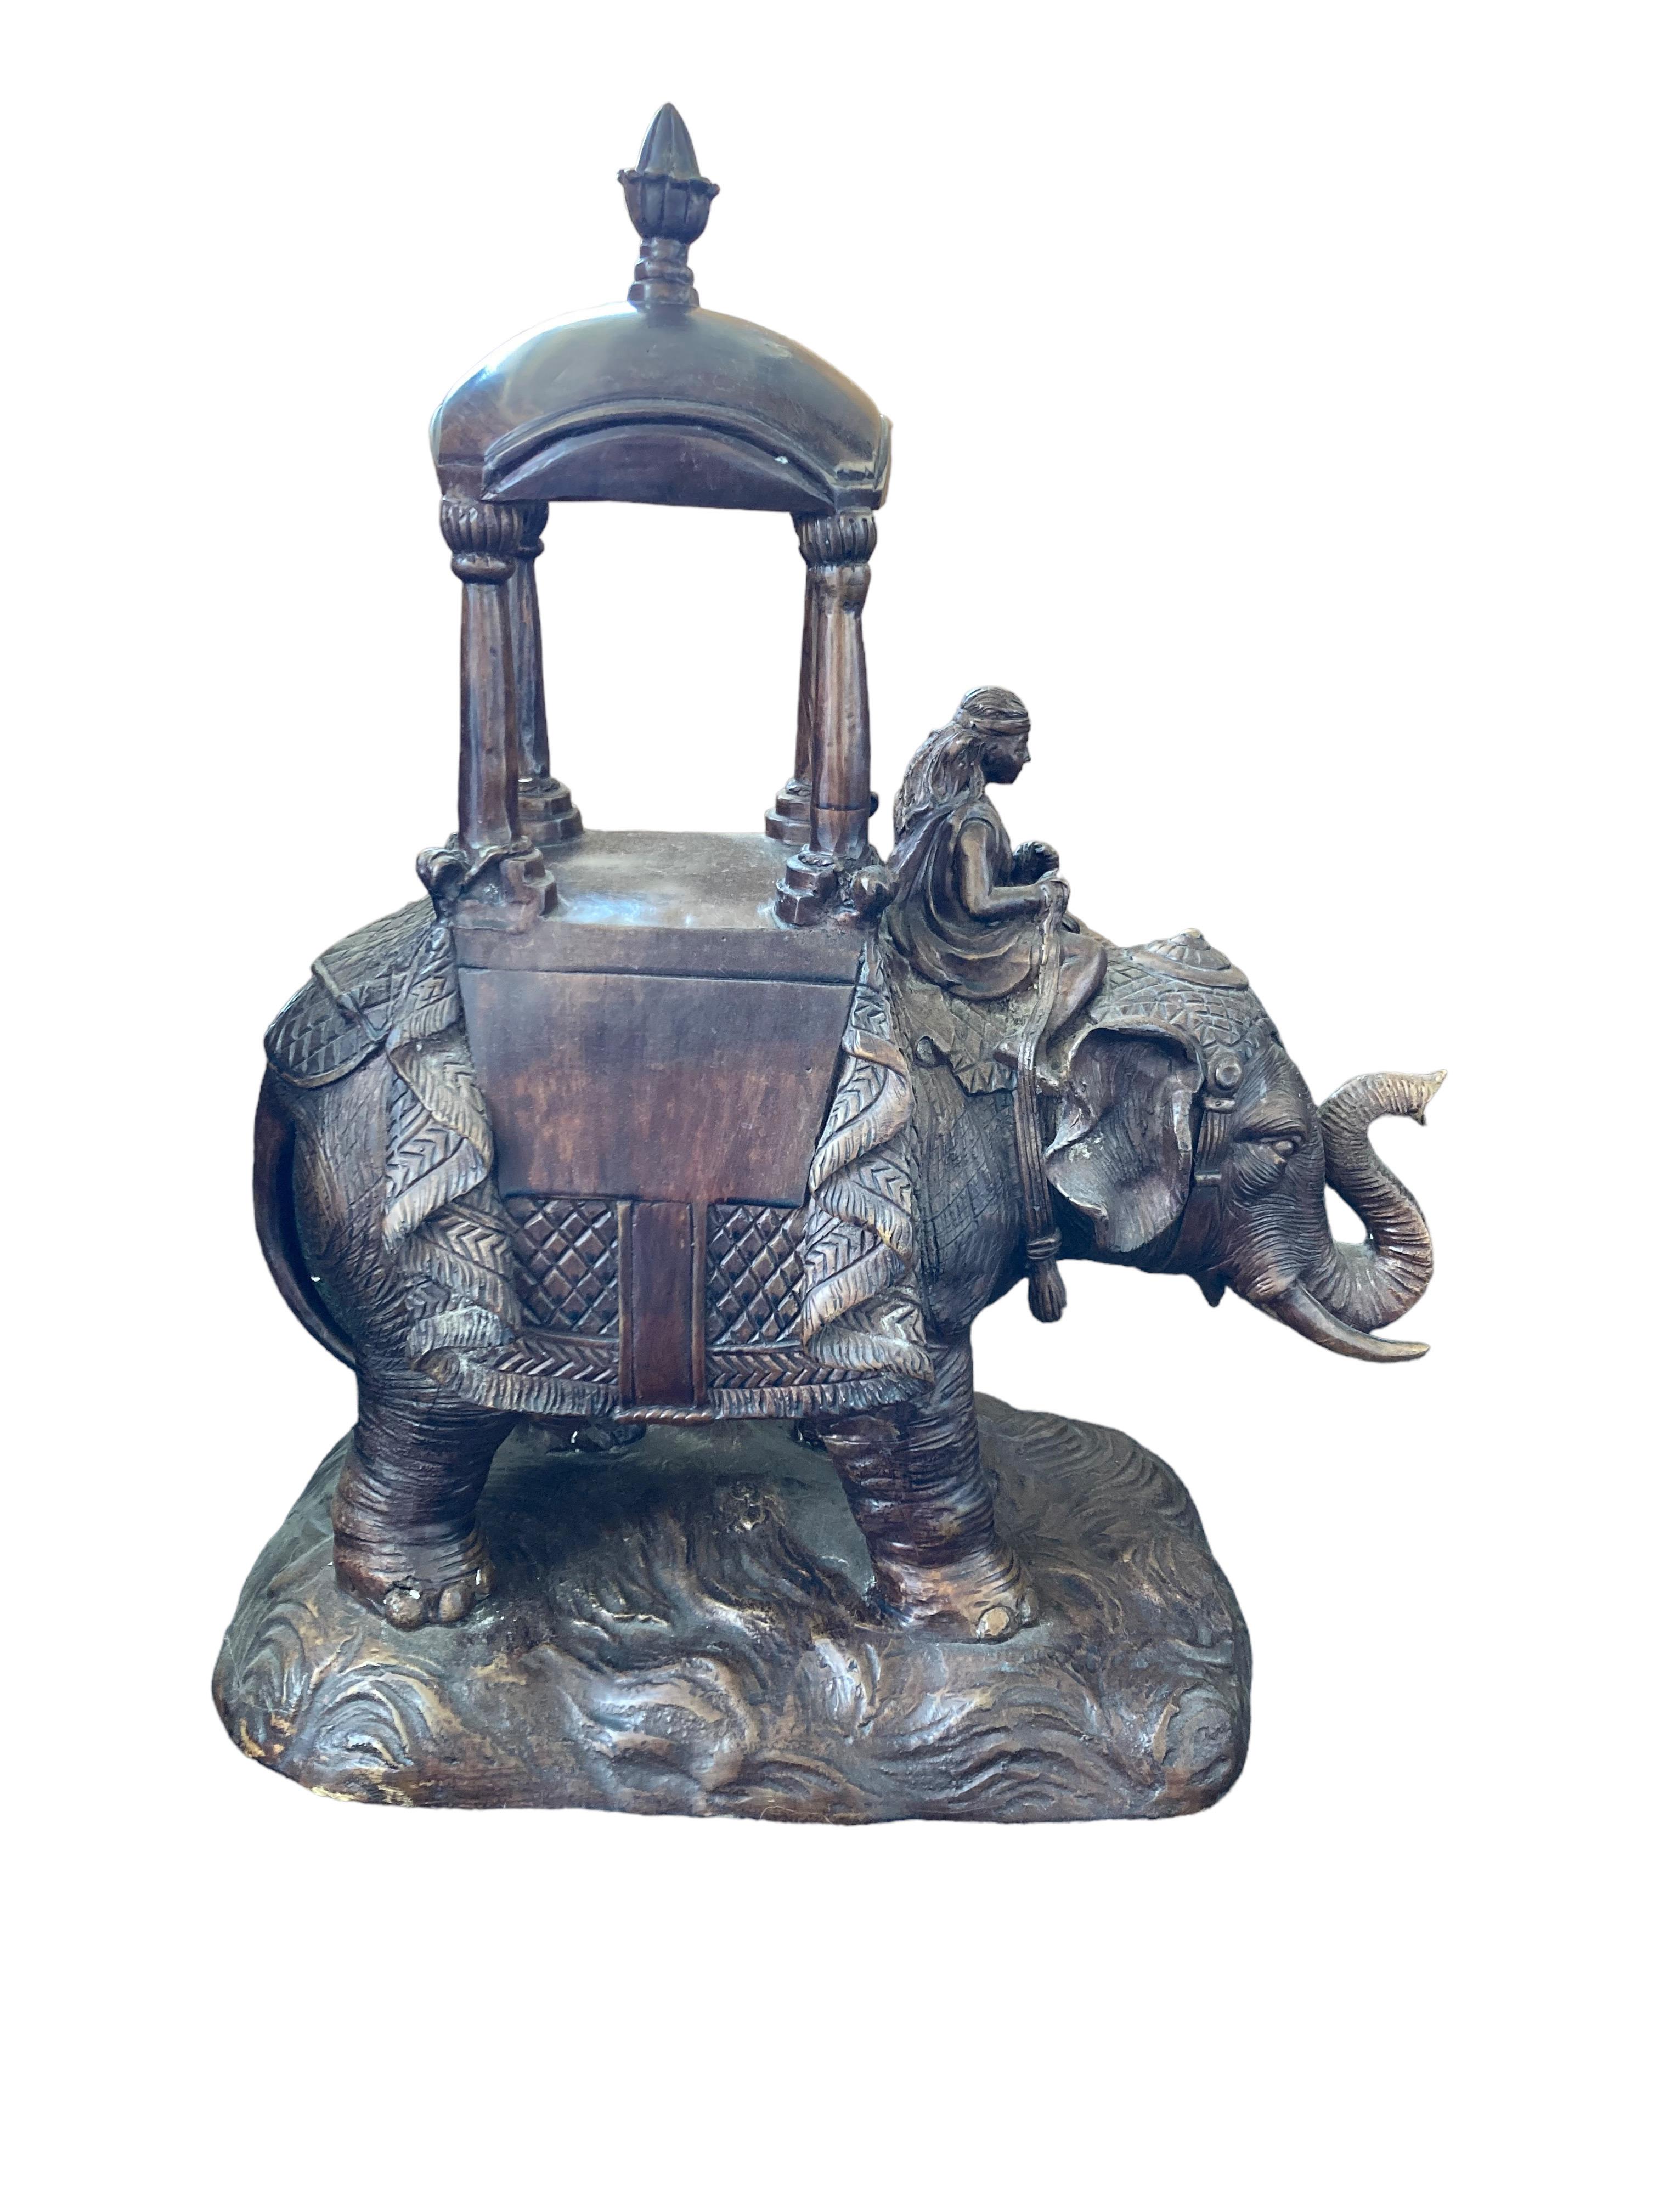 This Maitland Smith Parade Elephant With Mahout was cast in a dark bronze. Mahouts came from generations of elephant keeping experience and retained their elephant throughout its working life. They would often ride on a howdah placed on the back of